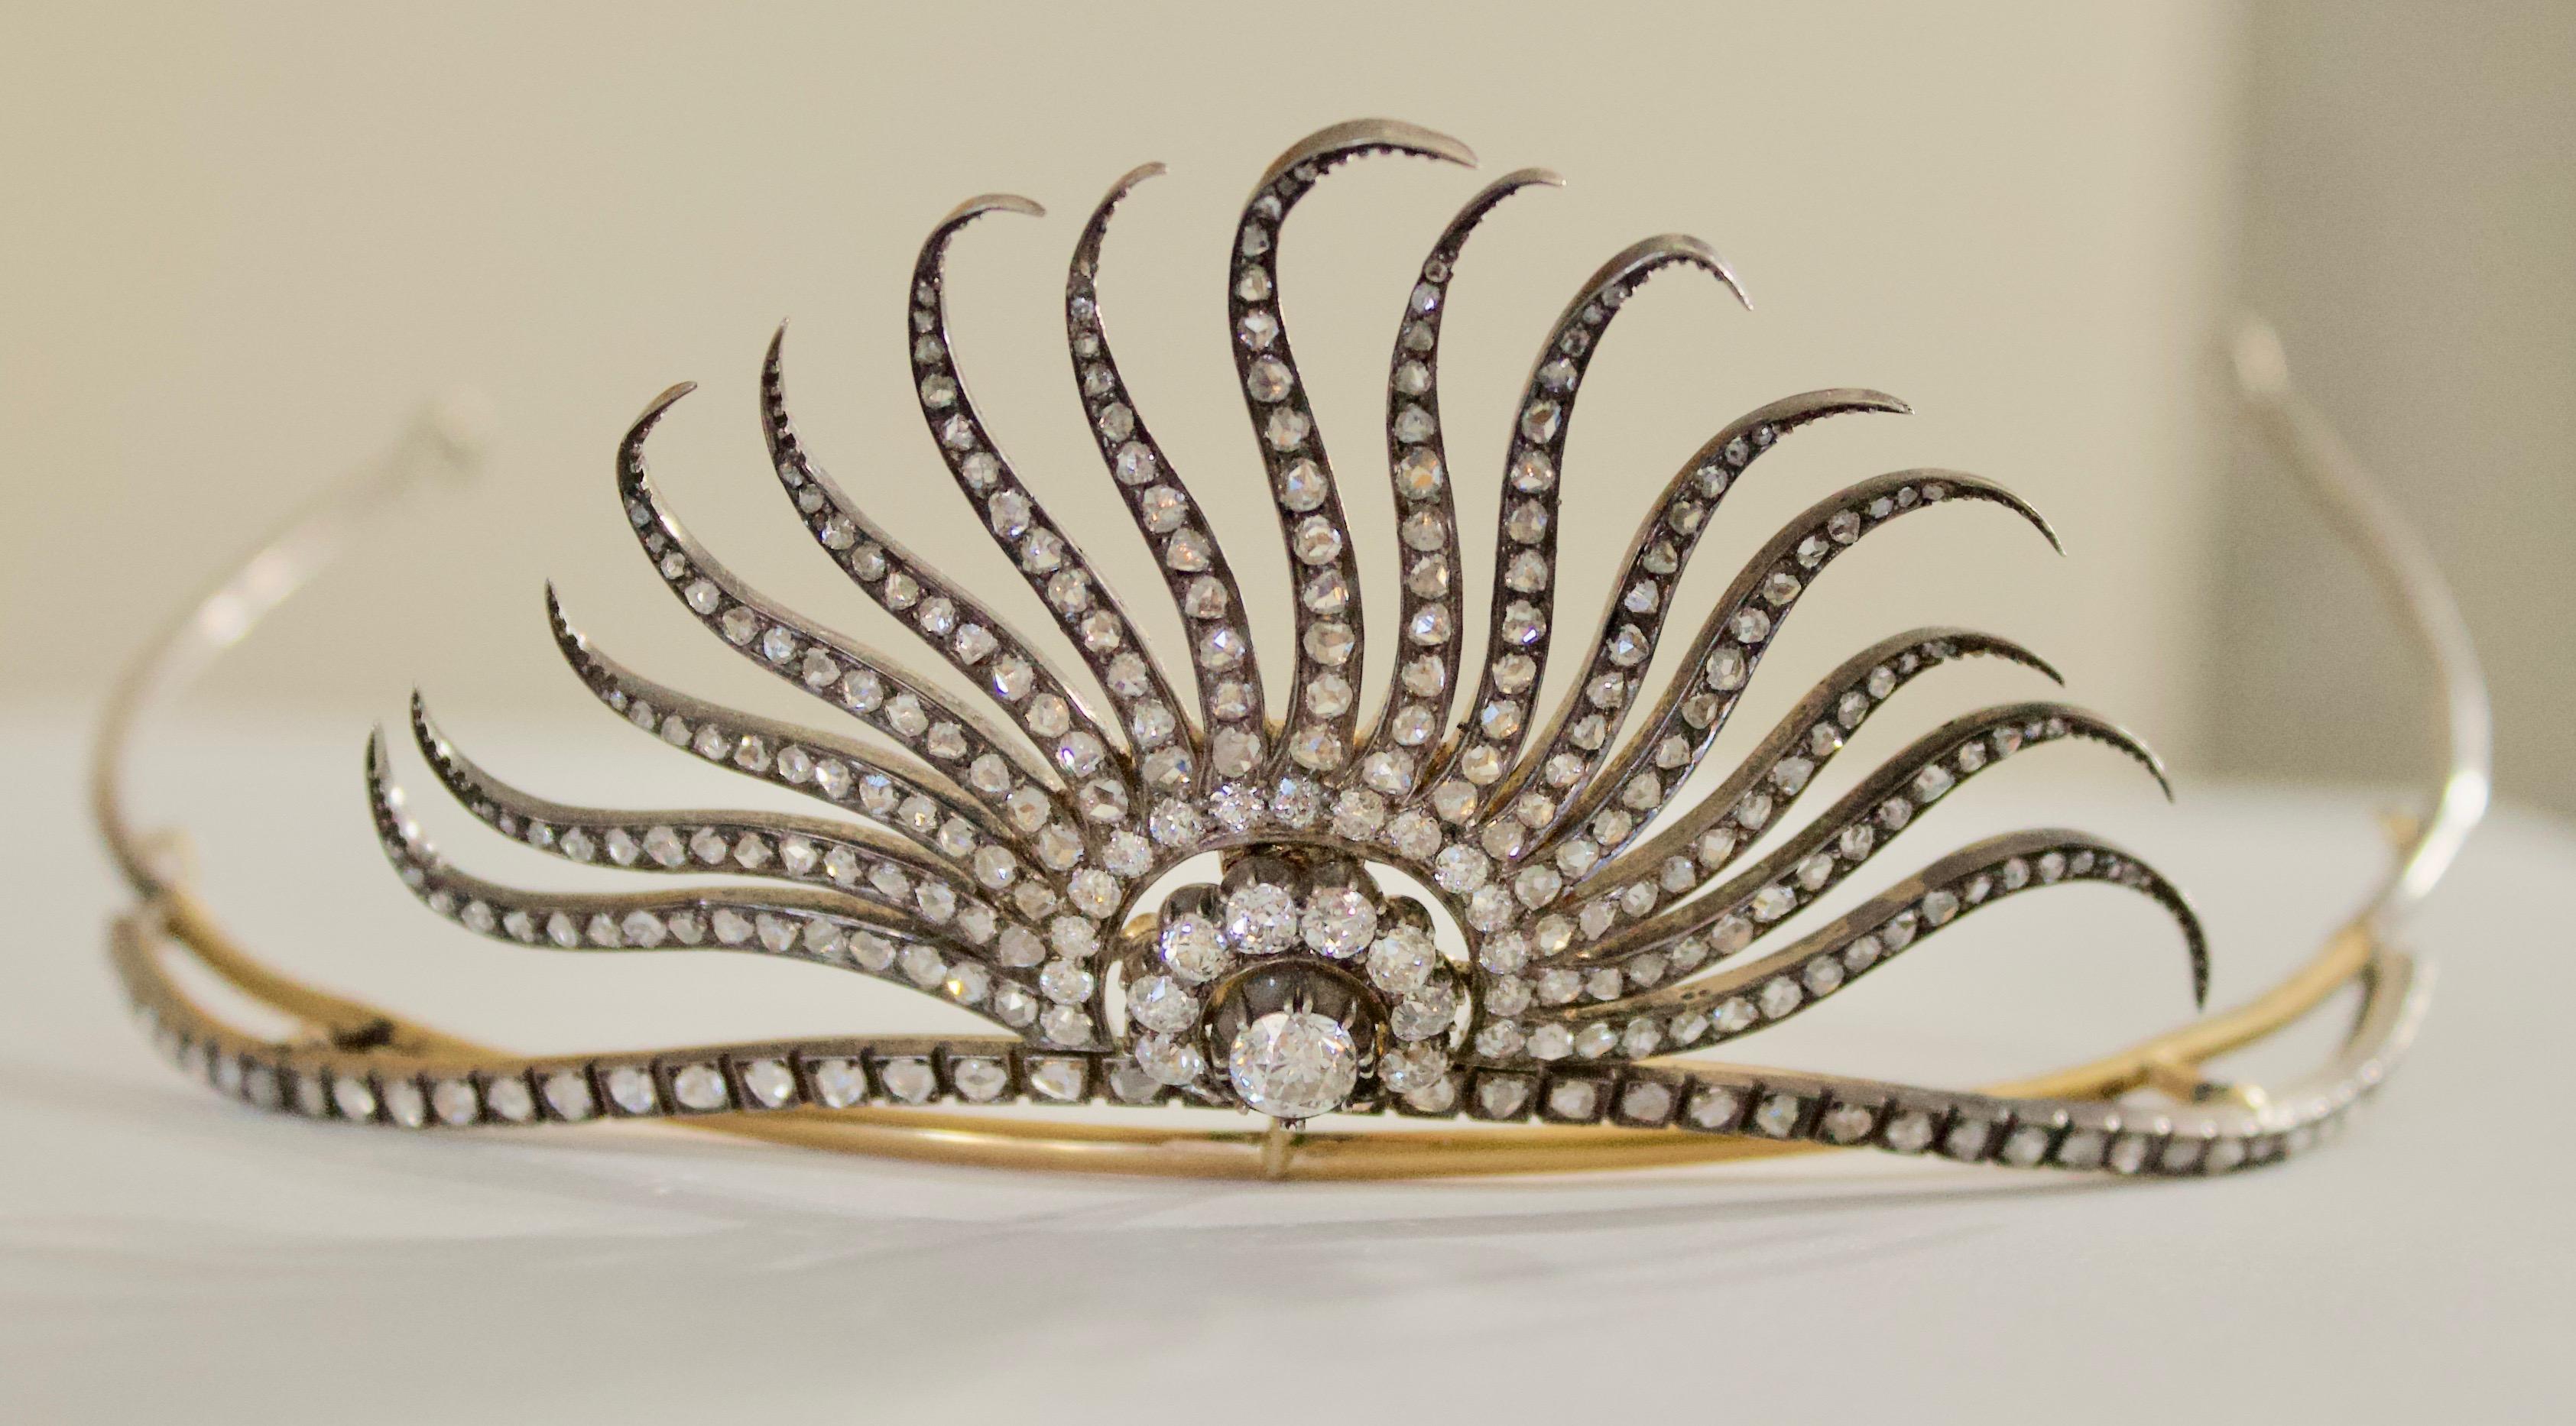 Old Mine Cut Diamond Tiara in Yellow Gold and Silver 7.10 Carat circa 1890 for Royalty Only